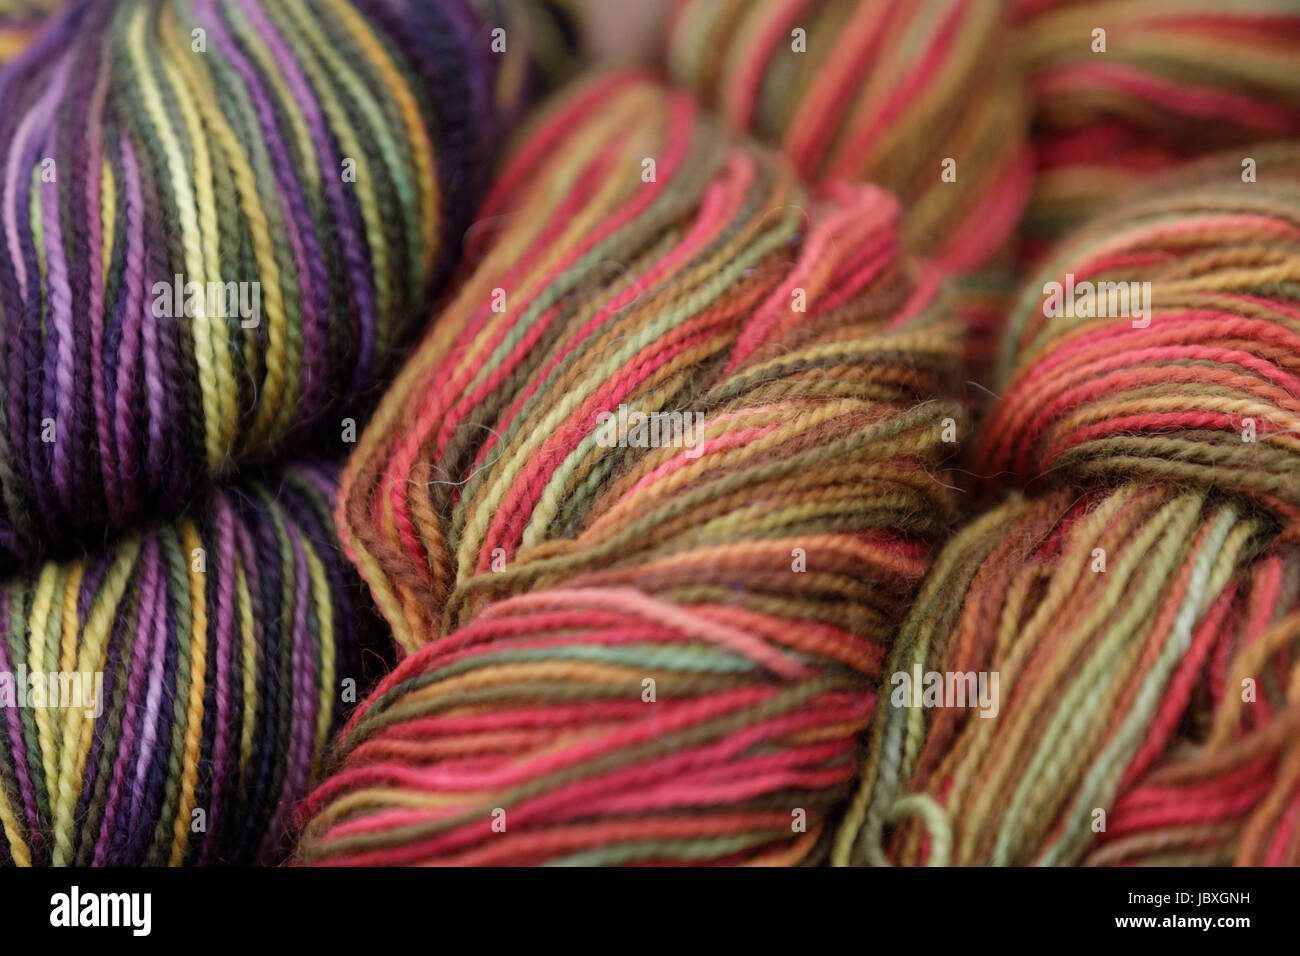 BOUCKVILLE, NY, USA - JUNE 10 2017: Hand dyed fiber skeins for sale at the annual Fiber Festival of Central New York. Stock Photo